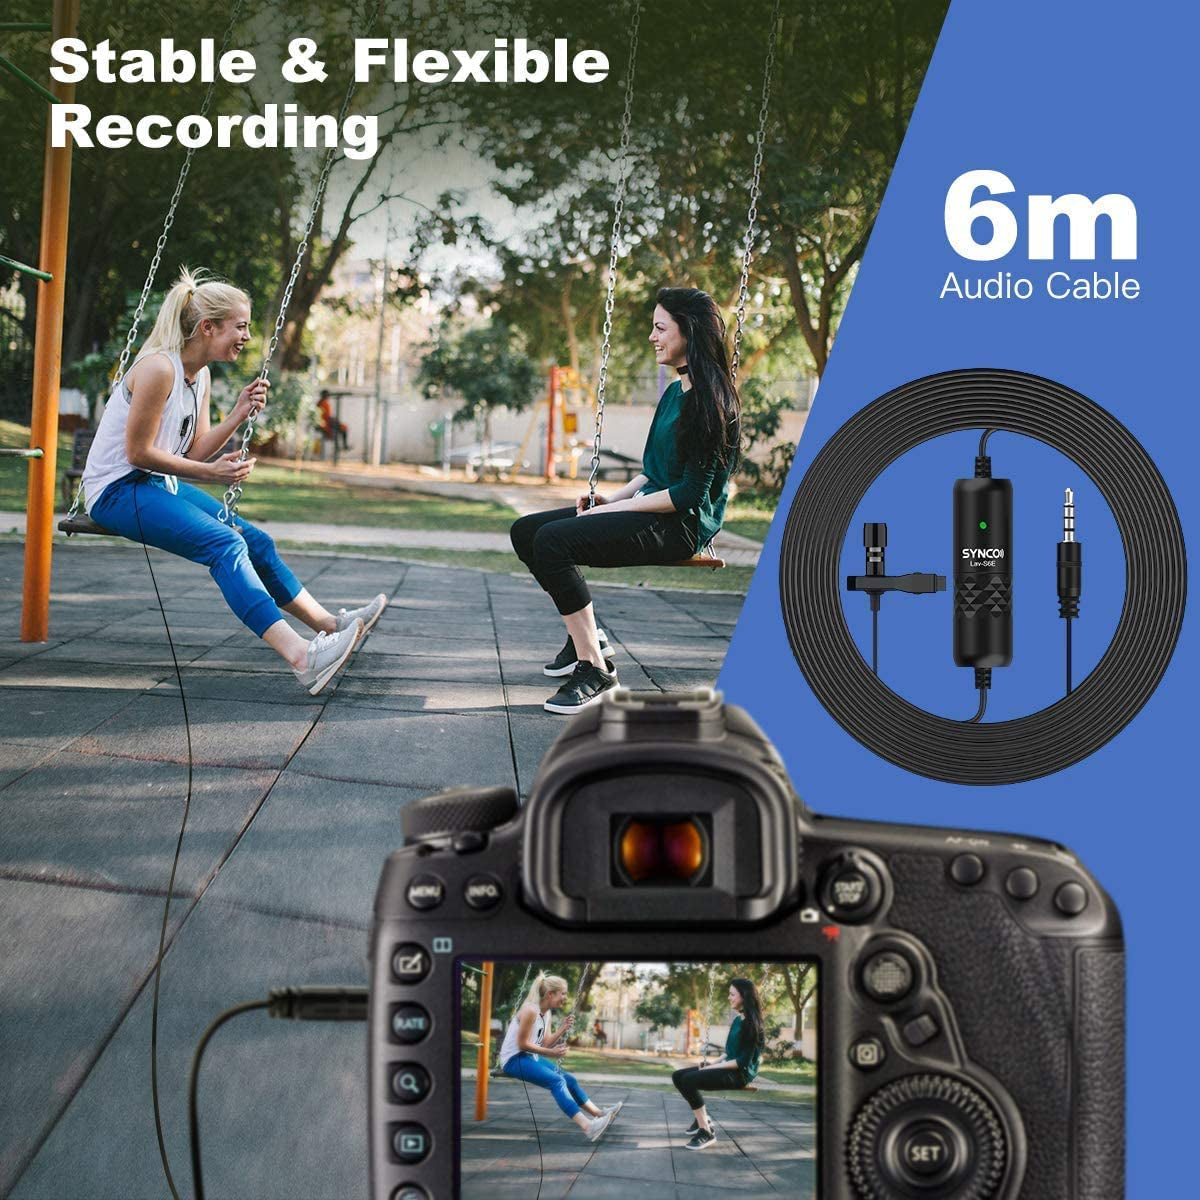 Lavalier Microphone, Moman S6E Mini Lapel Mic Omnidirectional Condenser for 6M 360°Recording for Smartphone Camera PC Laptop Youtube Interview Video Vlogging, Lavalier-Microphone-Lapel-Phone-Camera